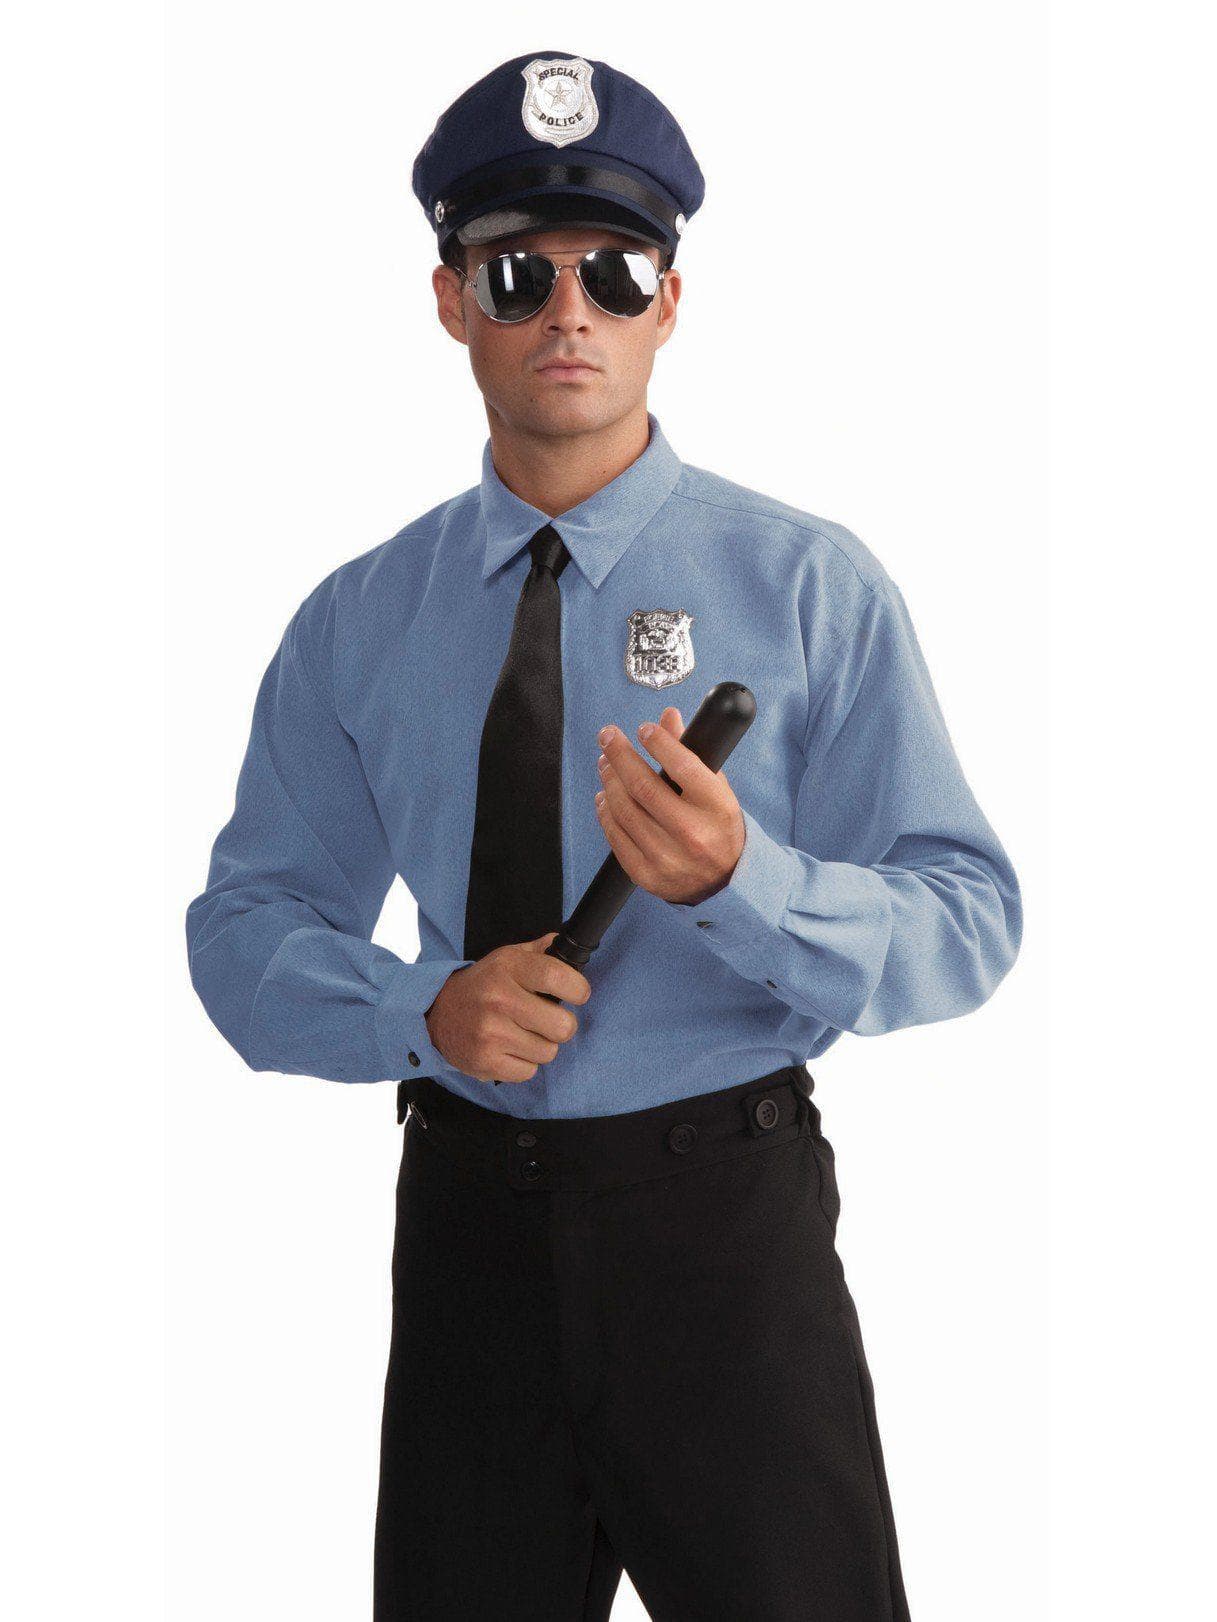 Adult Police Officer Accessory Set - costumes.com